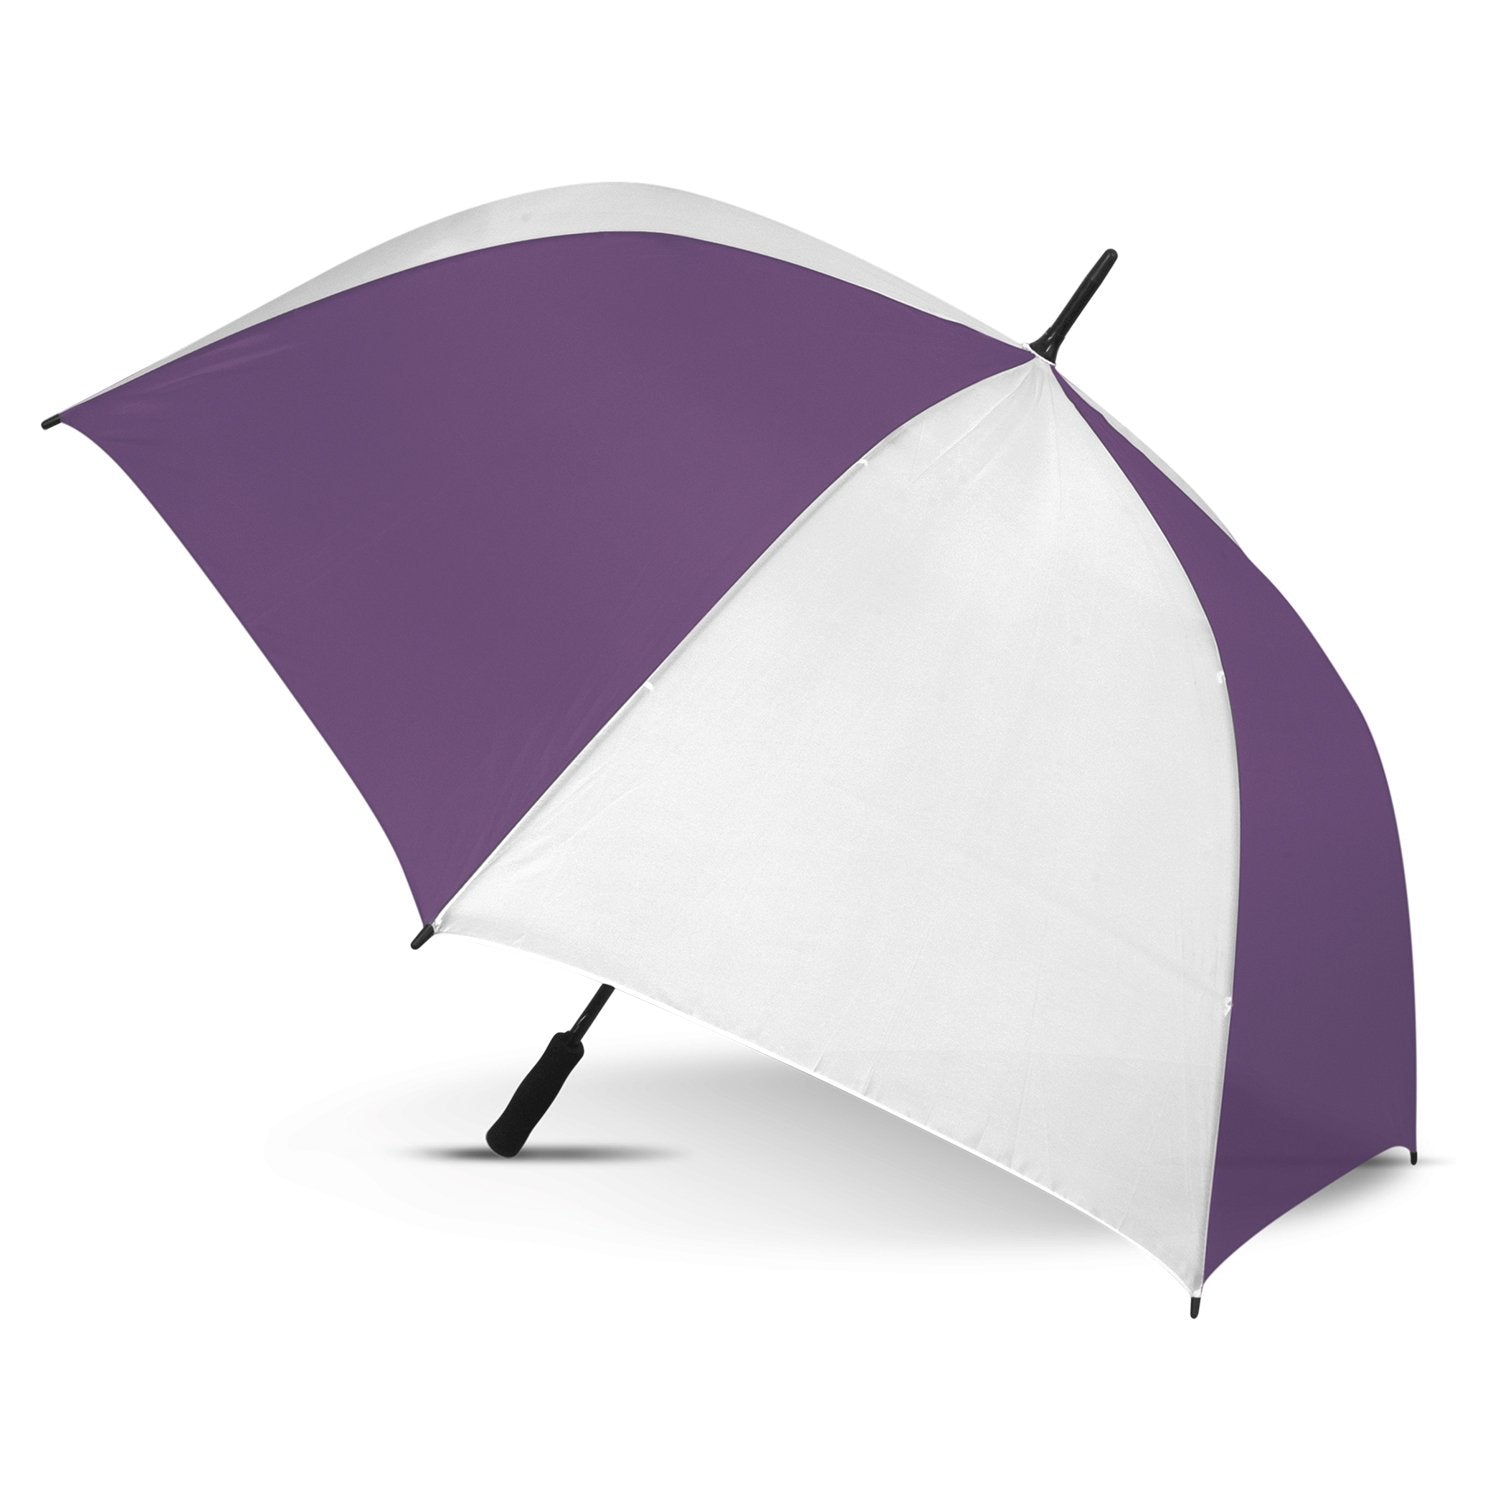 STORM PROOF ULTIMATE®️ Heavy Duty Sports Umbrella with Windproof Fibreglass Frame - Premium Automatic Opening - White Panels